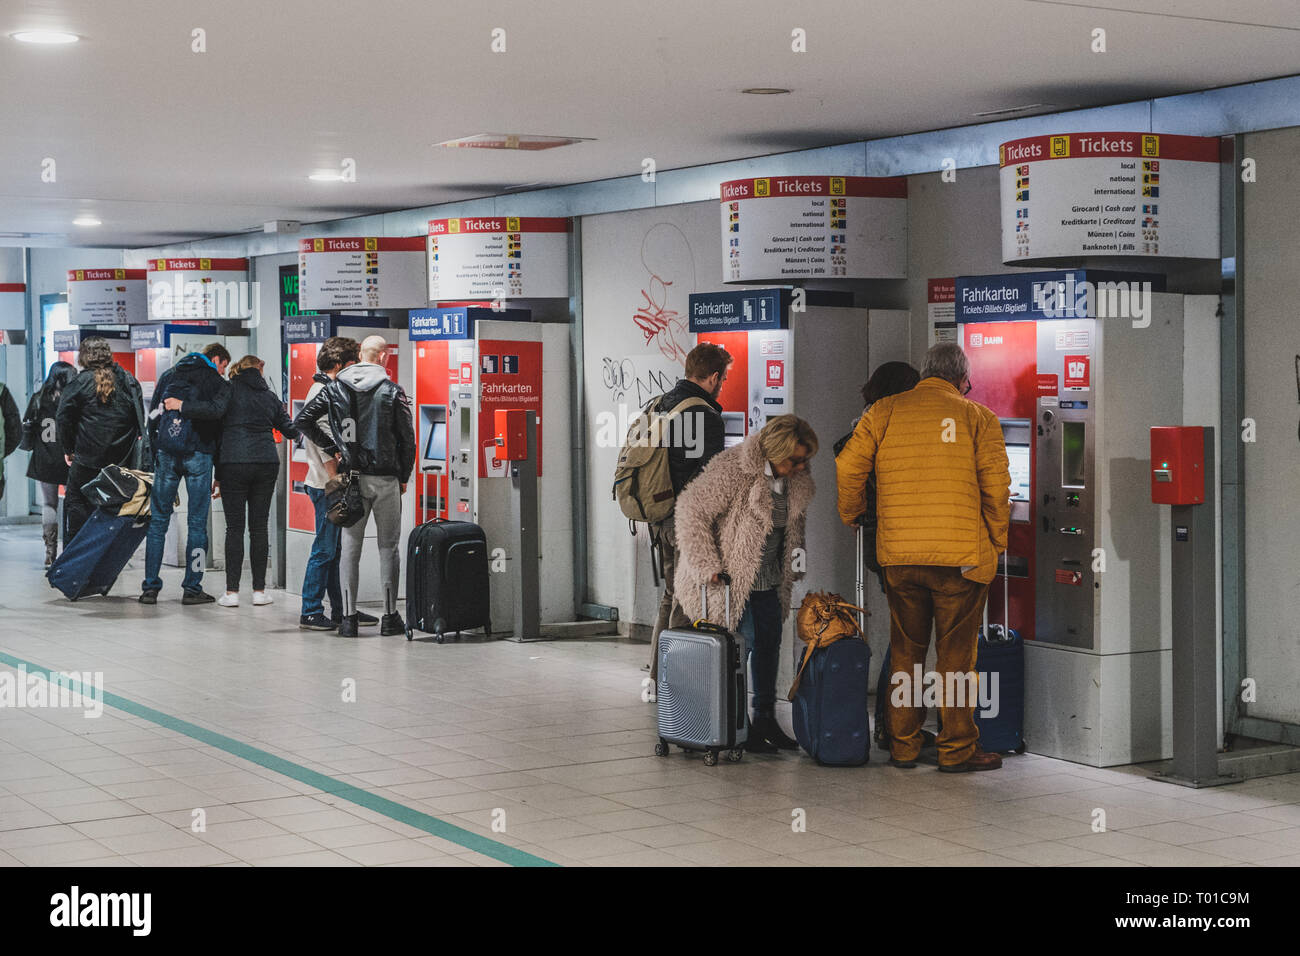 Berlin, Germany - march 2019: People with luggage buying train ticket at vending machine near airport in Berlin Stock Photo